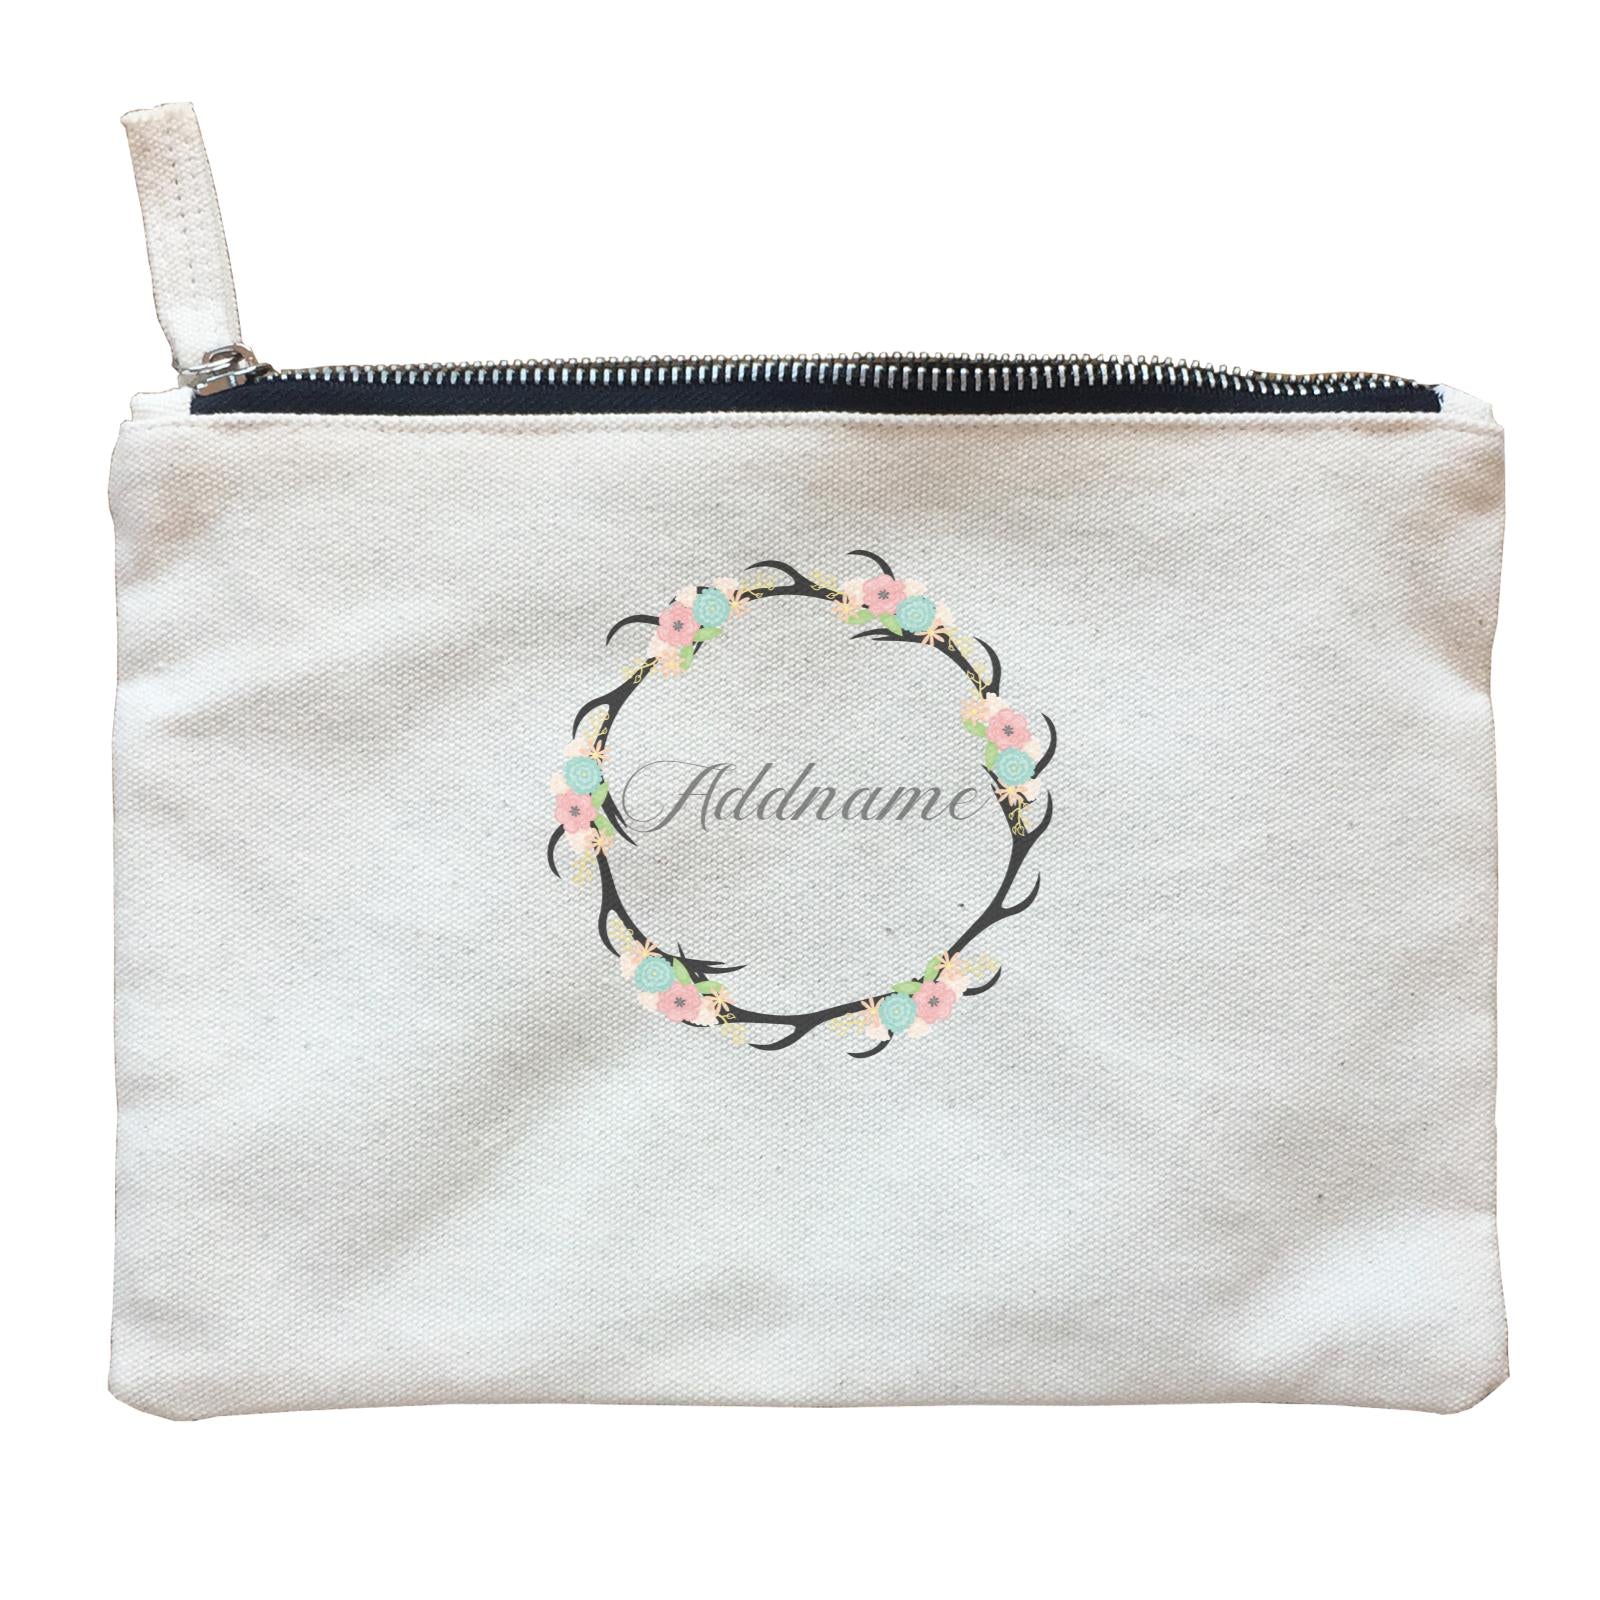 Basic Family Series Pastel Deer Flower And Antlers Wreath Addname Zipper Pouch